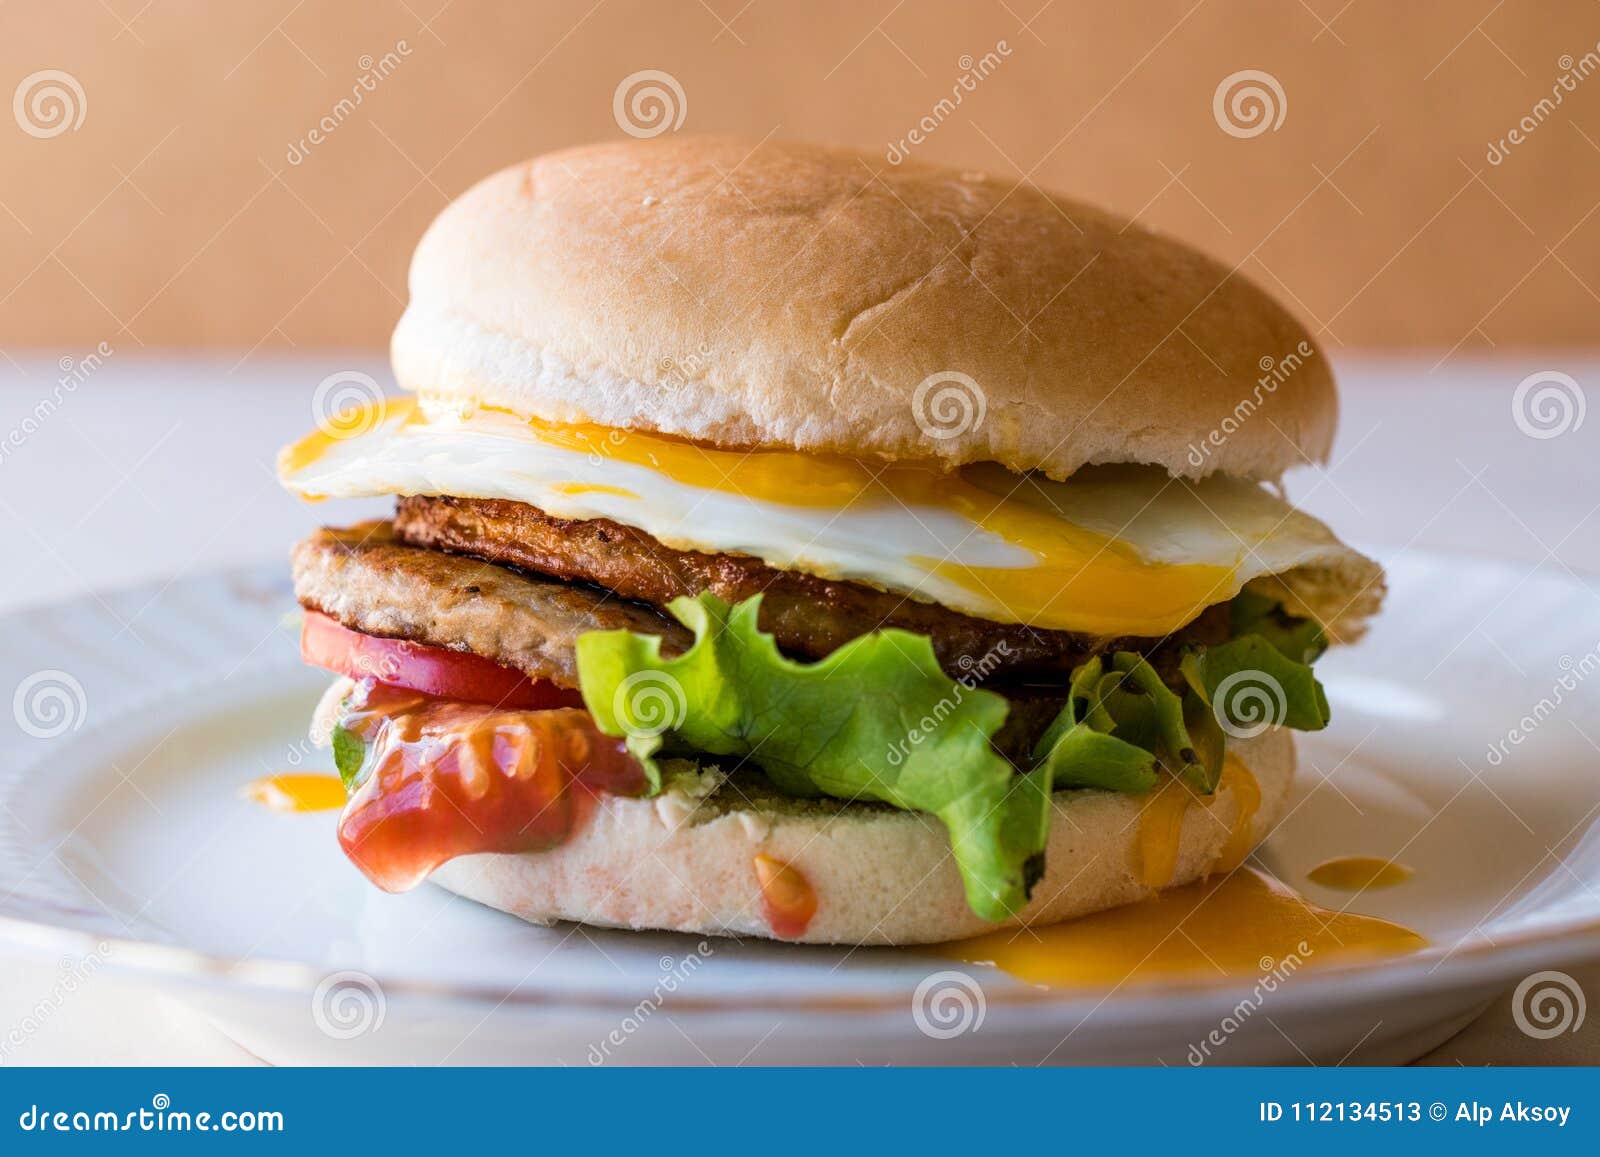 Homemade Double Hamburger with Egg, Lettuce and Tomatoes. Stock Image ...